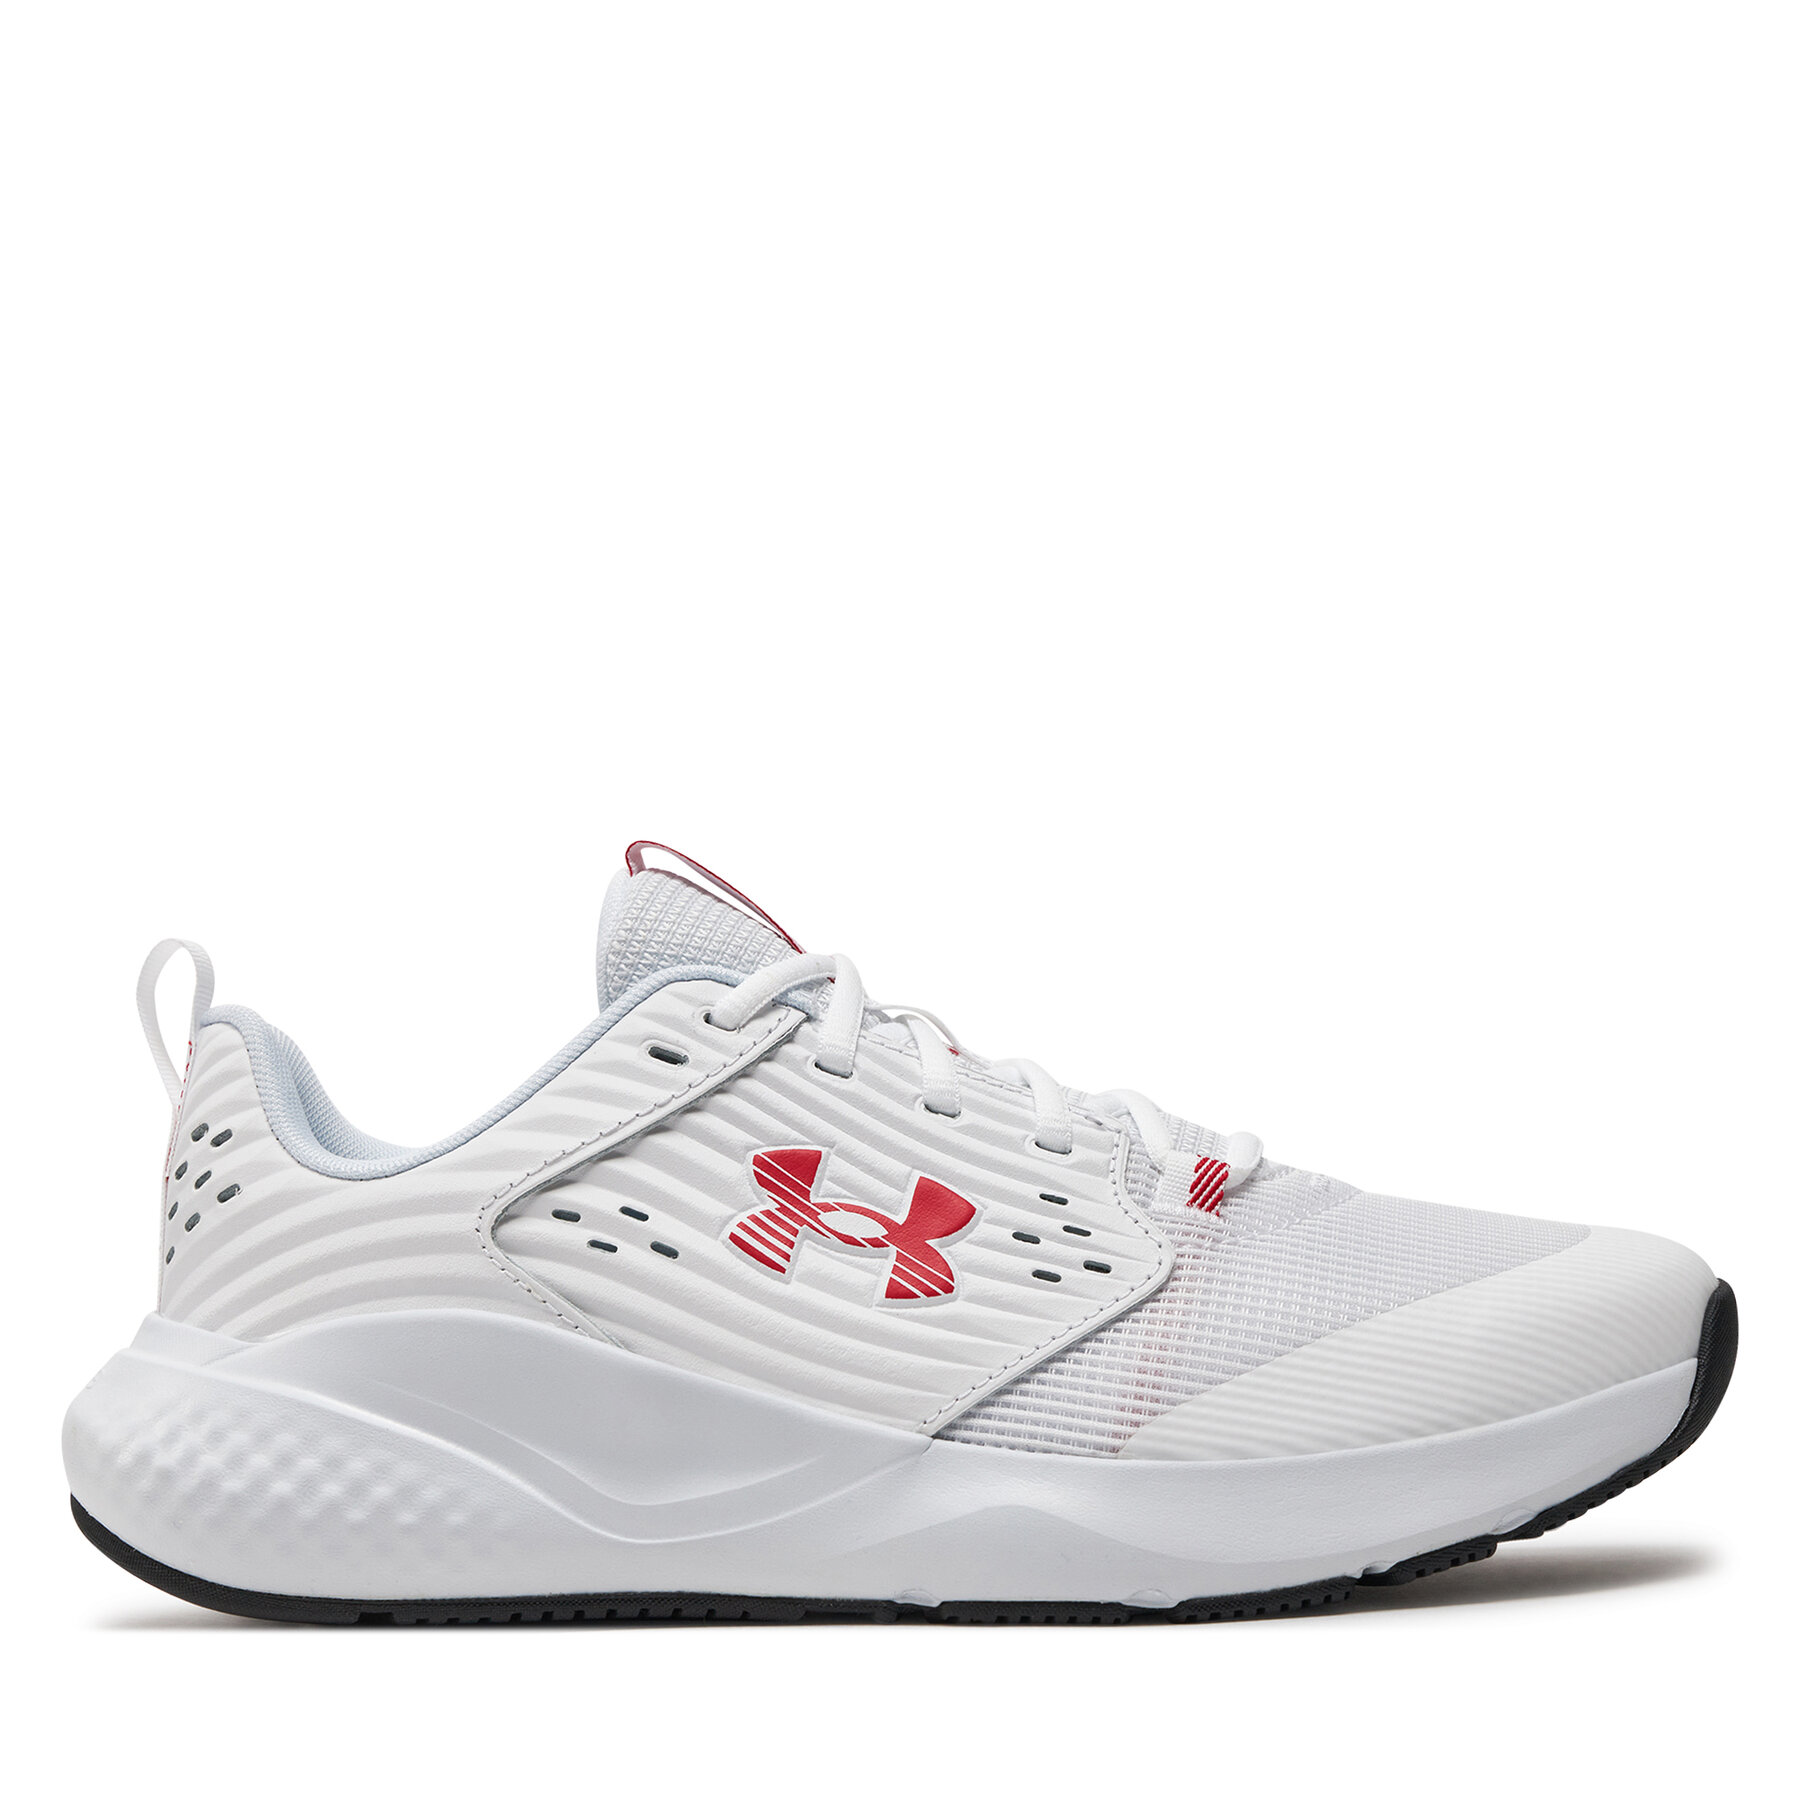 Schuhe Under Armour Ua Charged Commit Tr 4 3026017-103 White/Distant Gray/Red von Under Armour